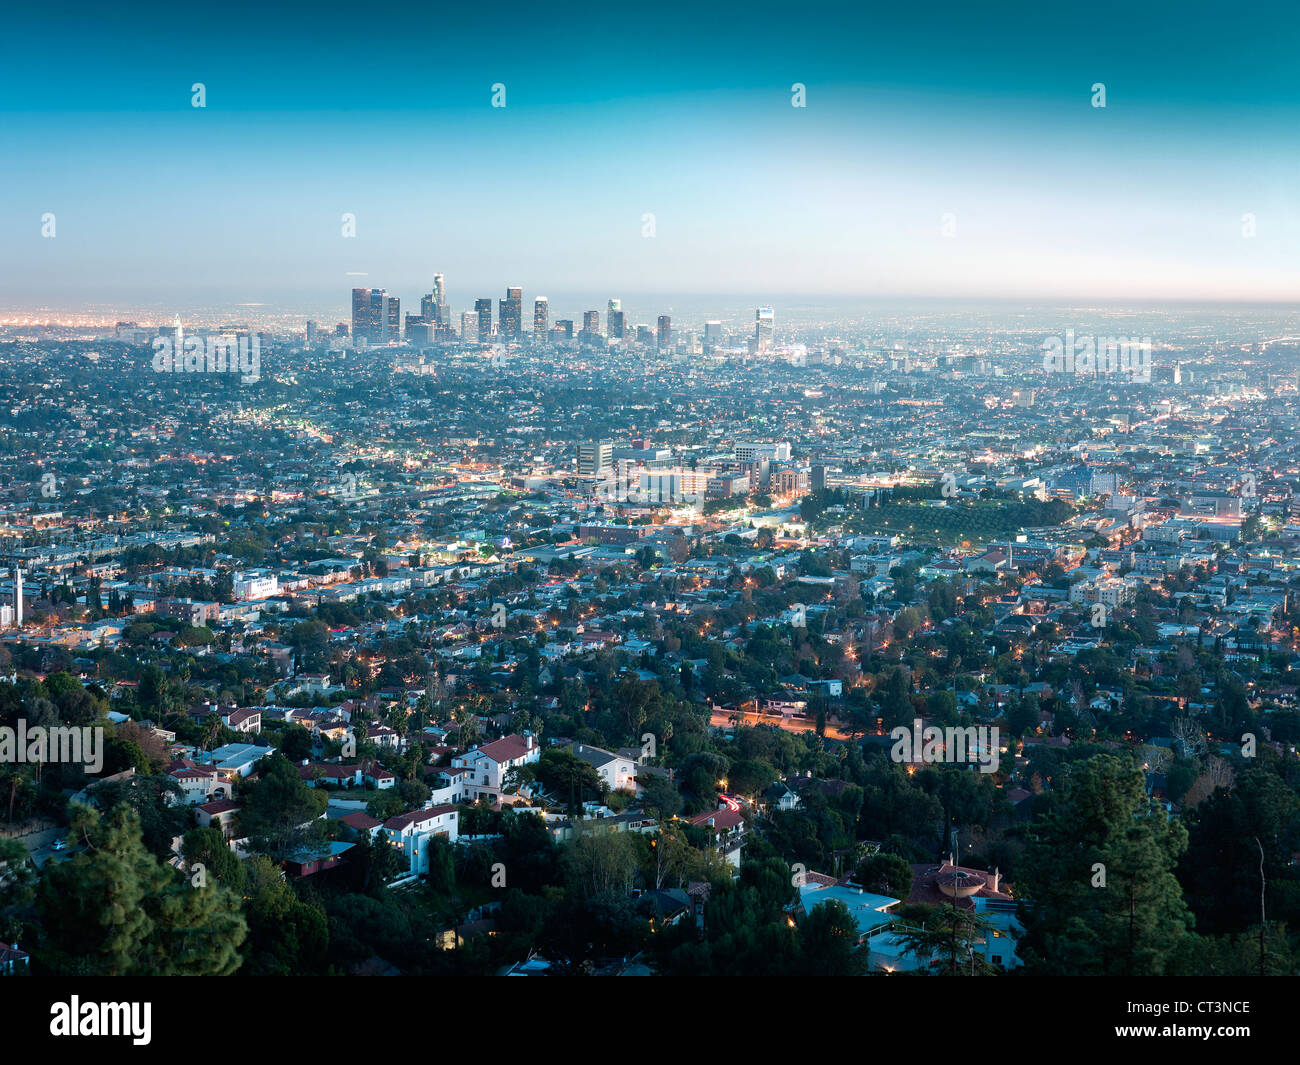 Aerial view of Los Angeles Stock Photo